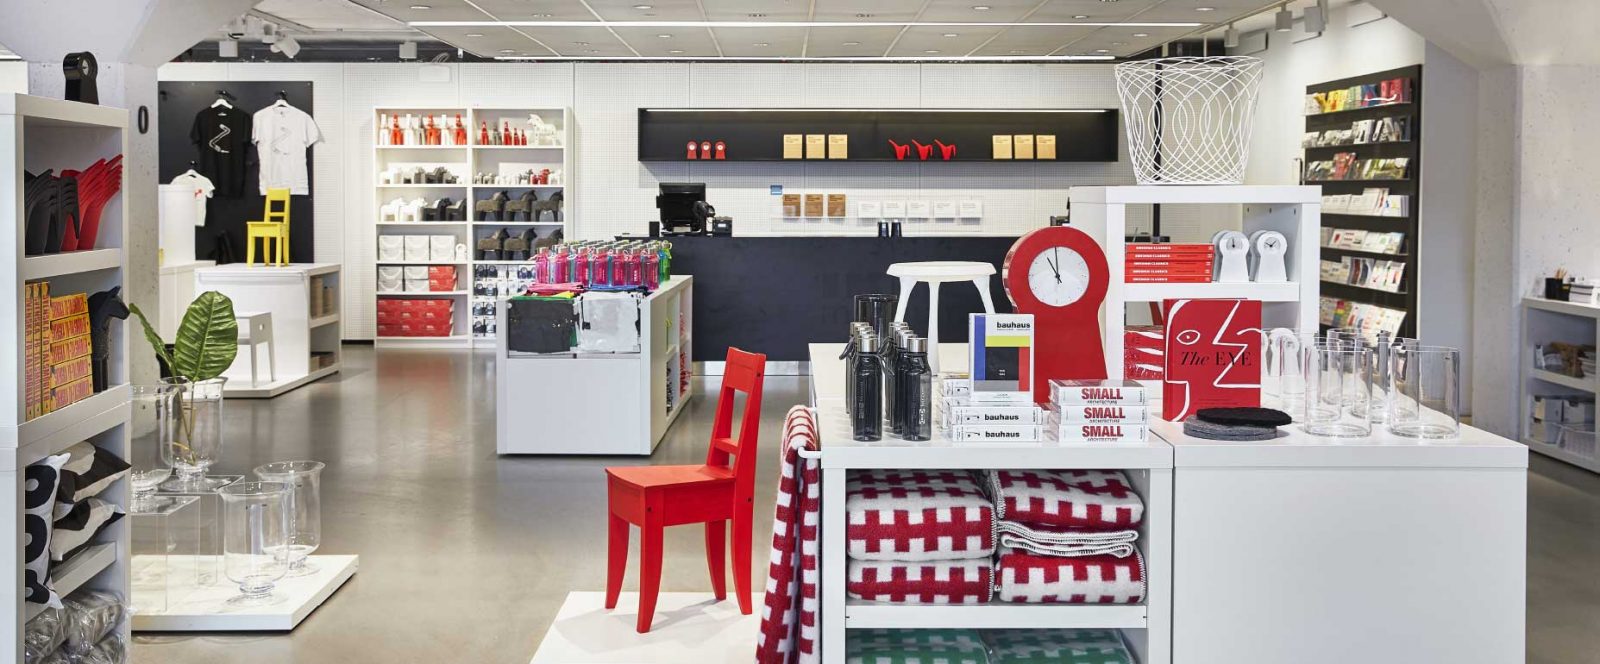 Find unique products in the museum shop - IKEA Museum